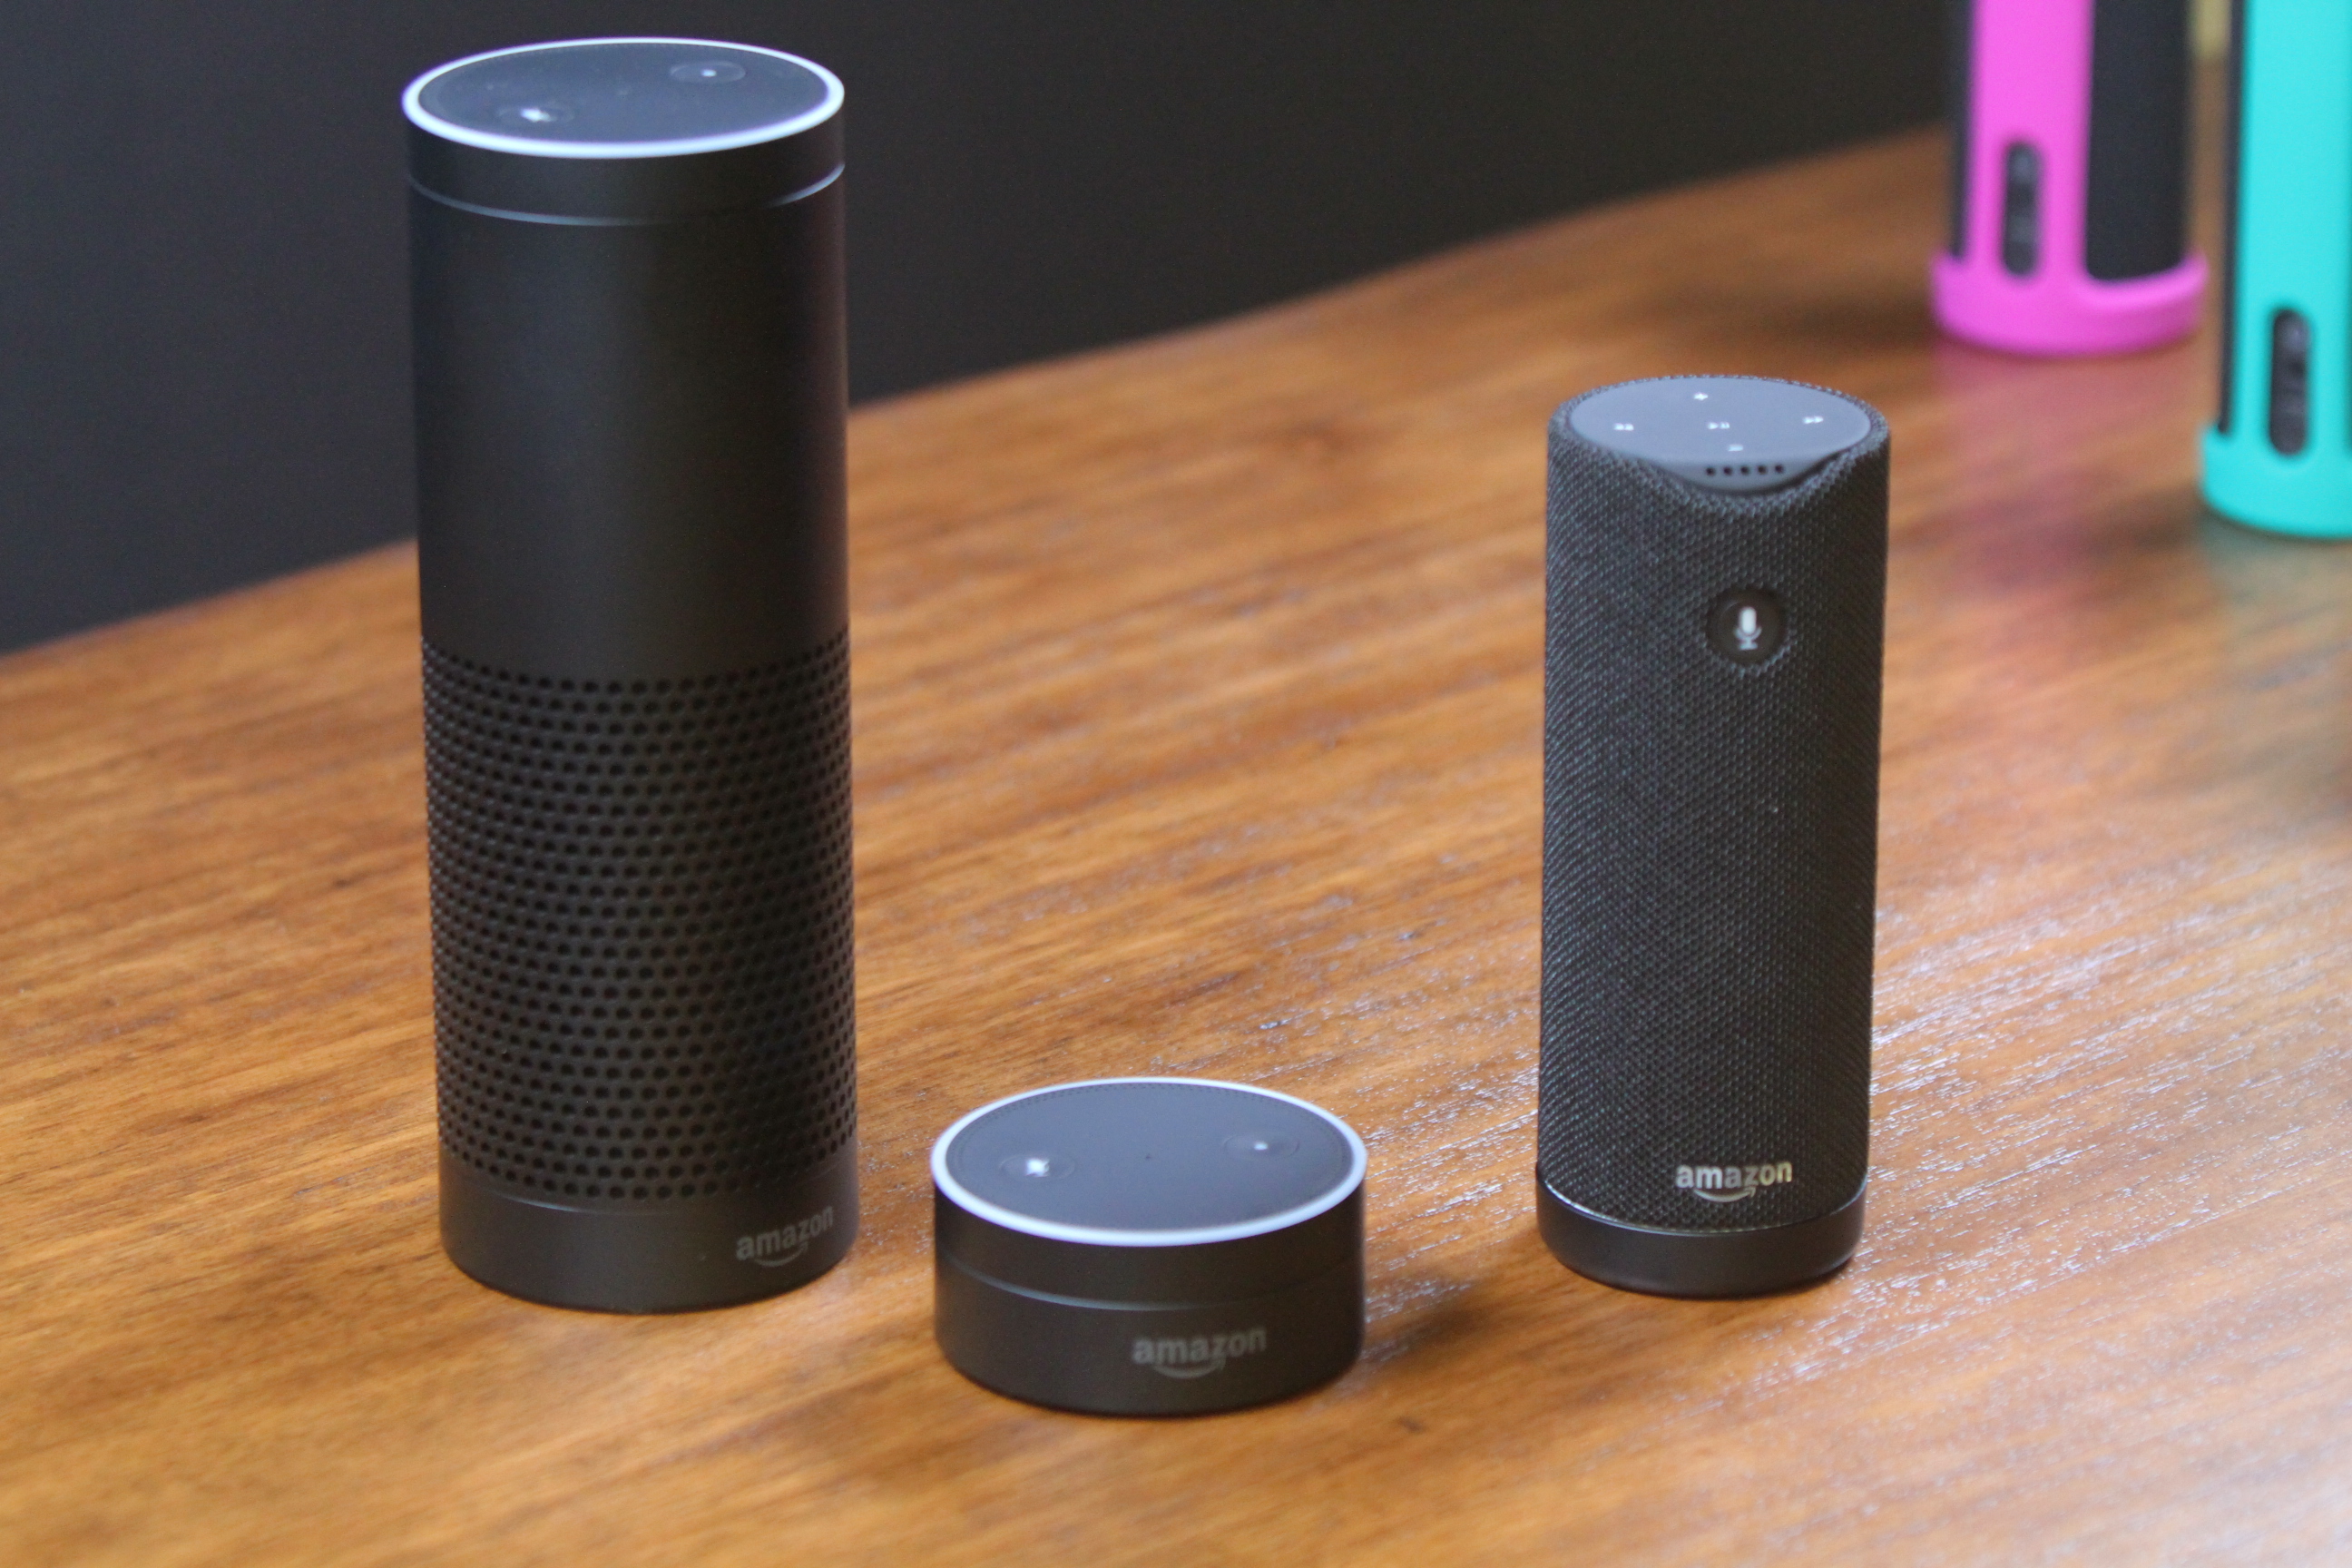 From left to right: Amazon Echo, Echo Dot, and Tap